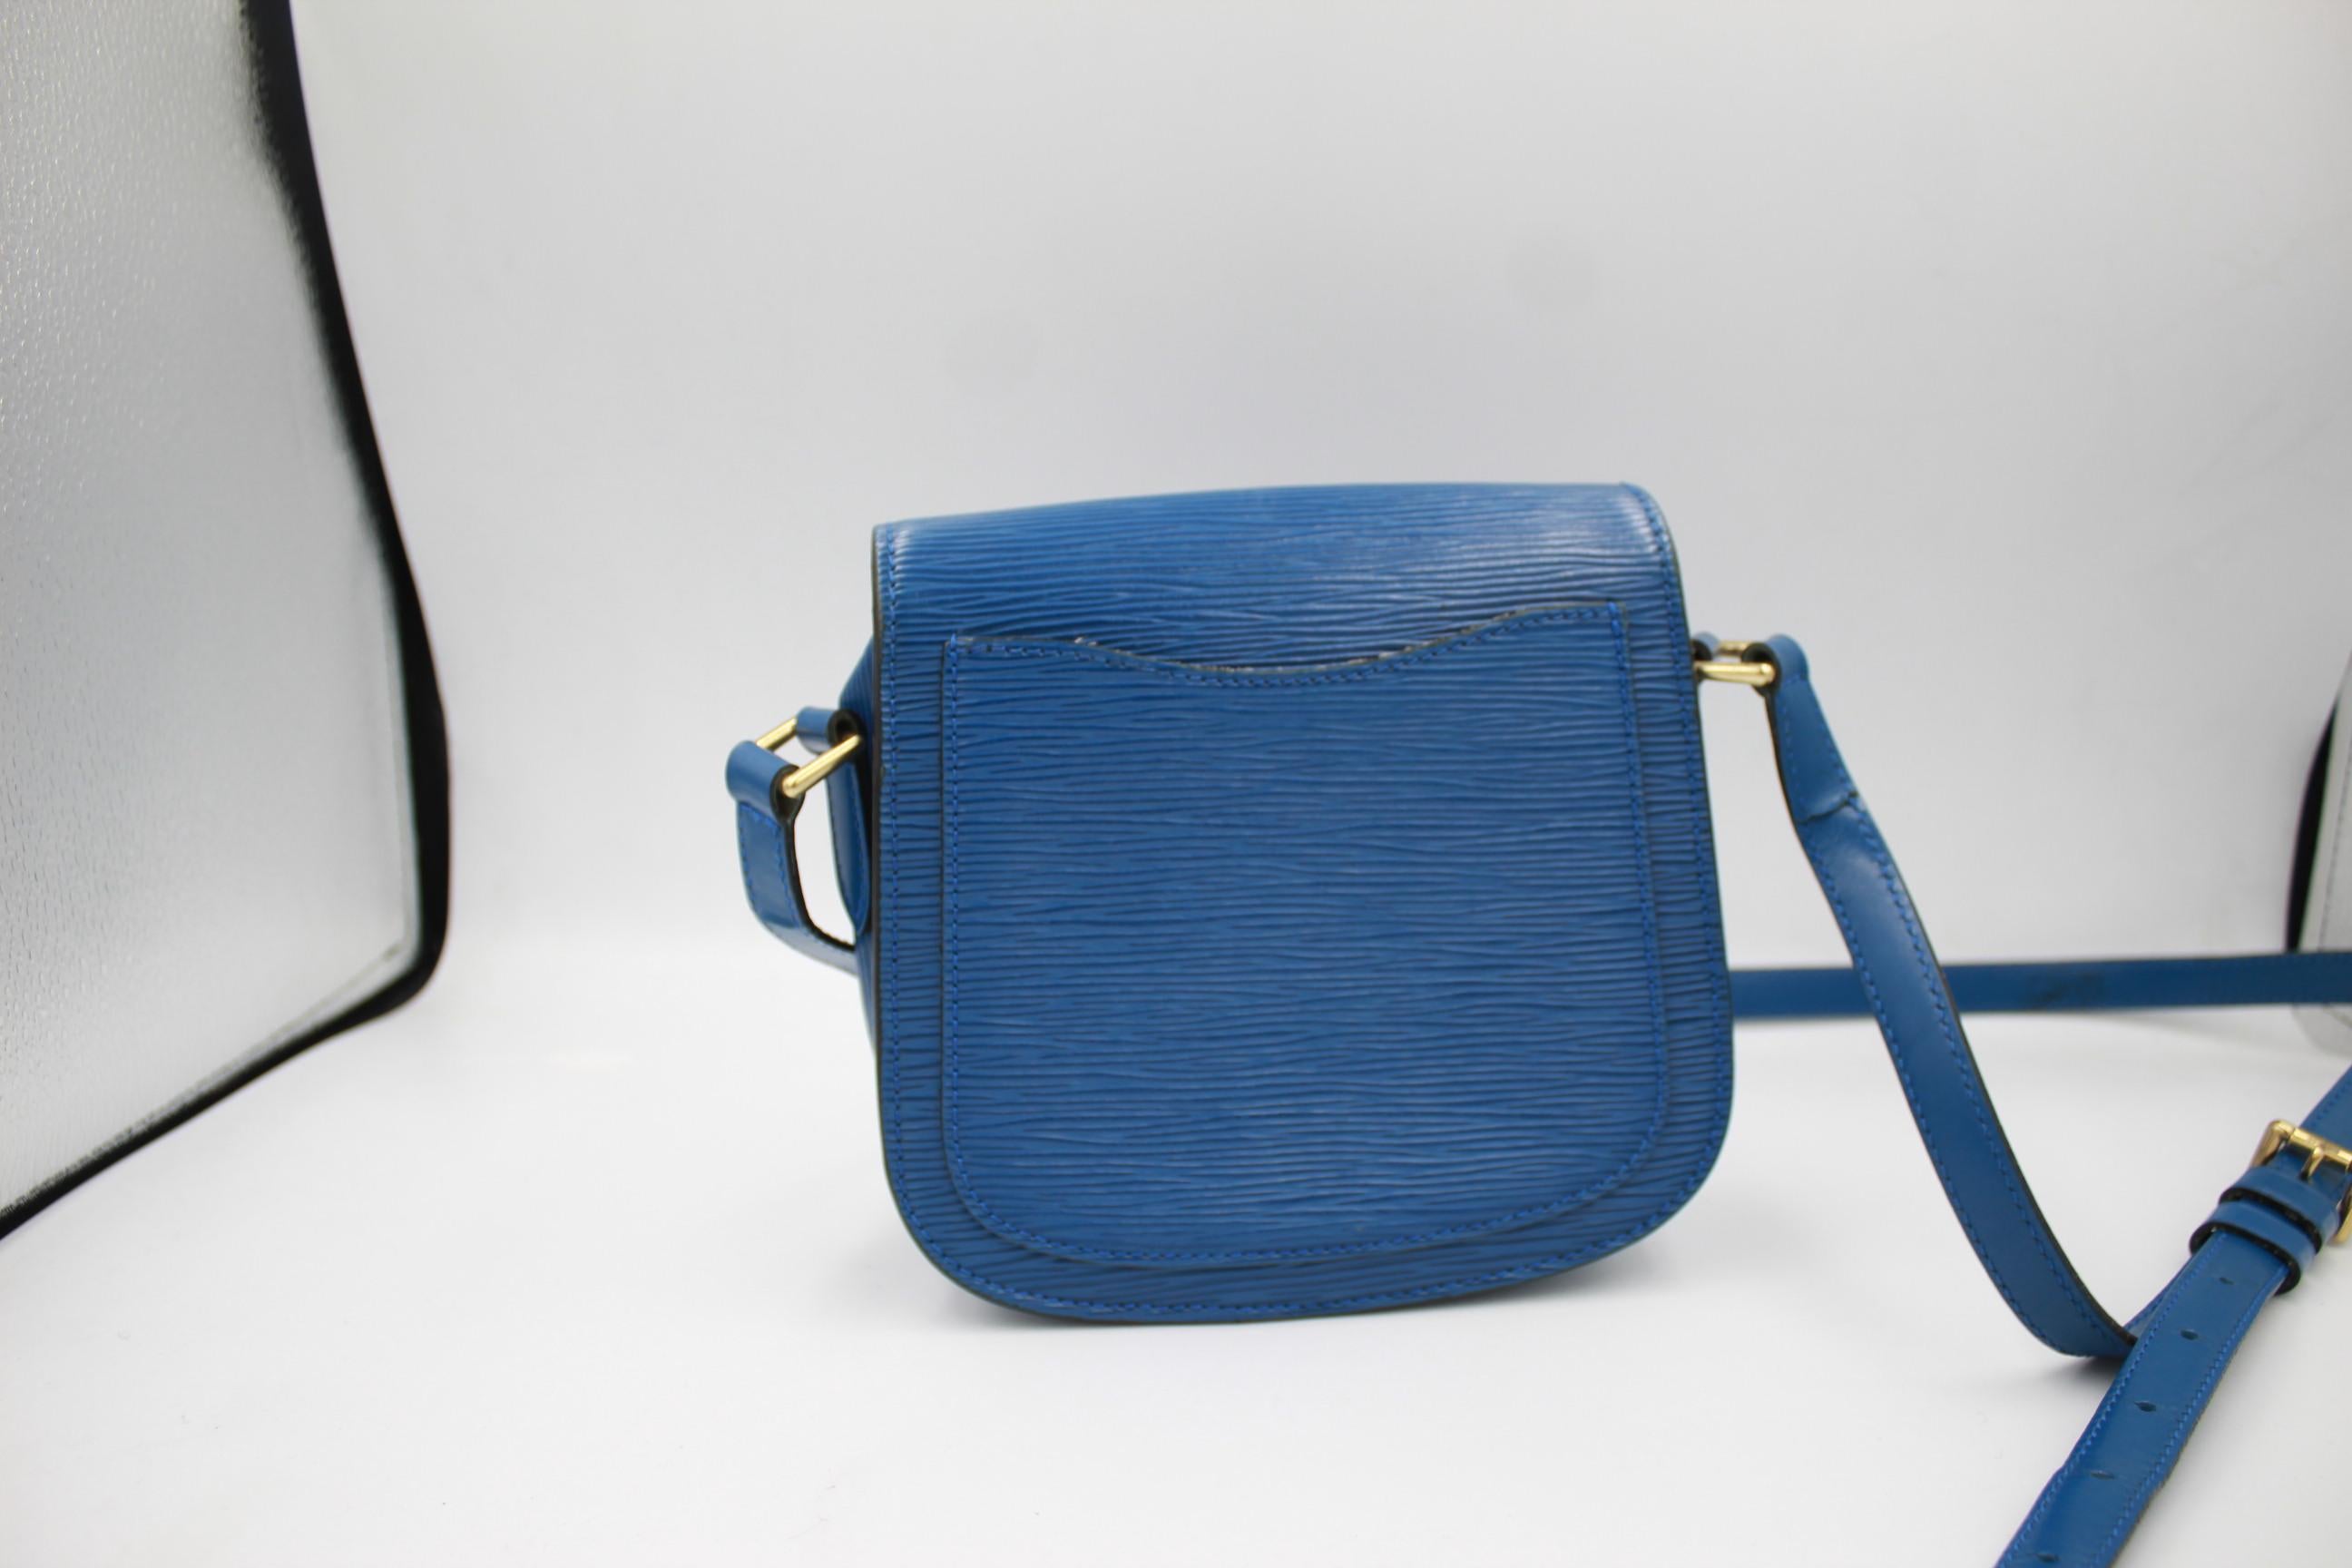 Louis Vuitton mini Saint Cloud handbag in blue epi leather
good conditions, with some sign of wear ( few cracks on the strap and on the borders )
Can be wear close body
17cm x 16cm x 5cm
